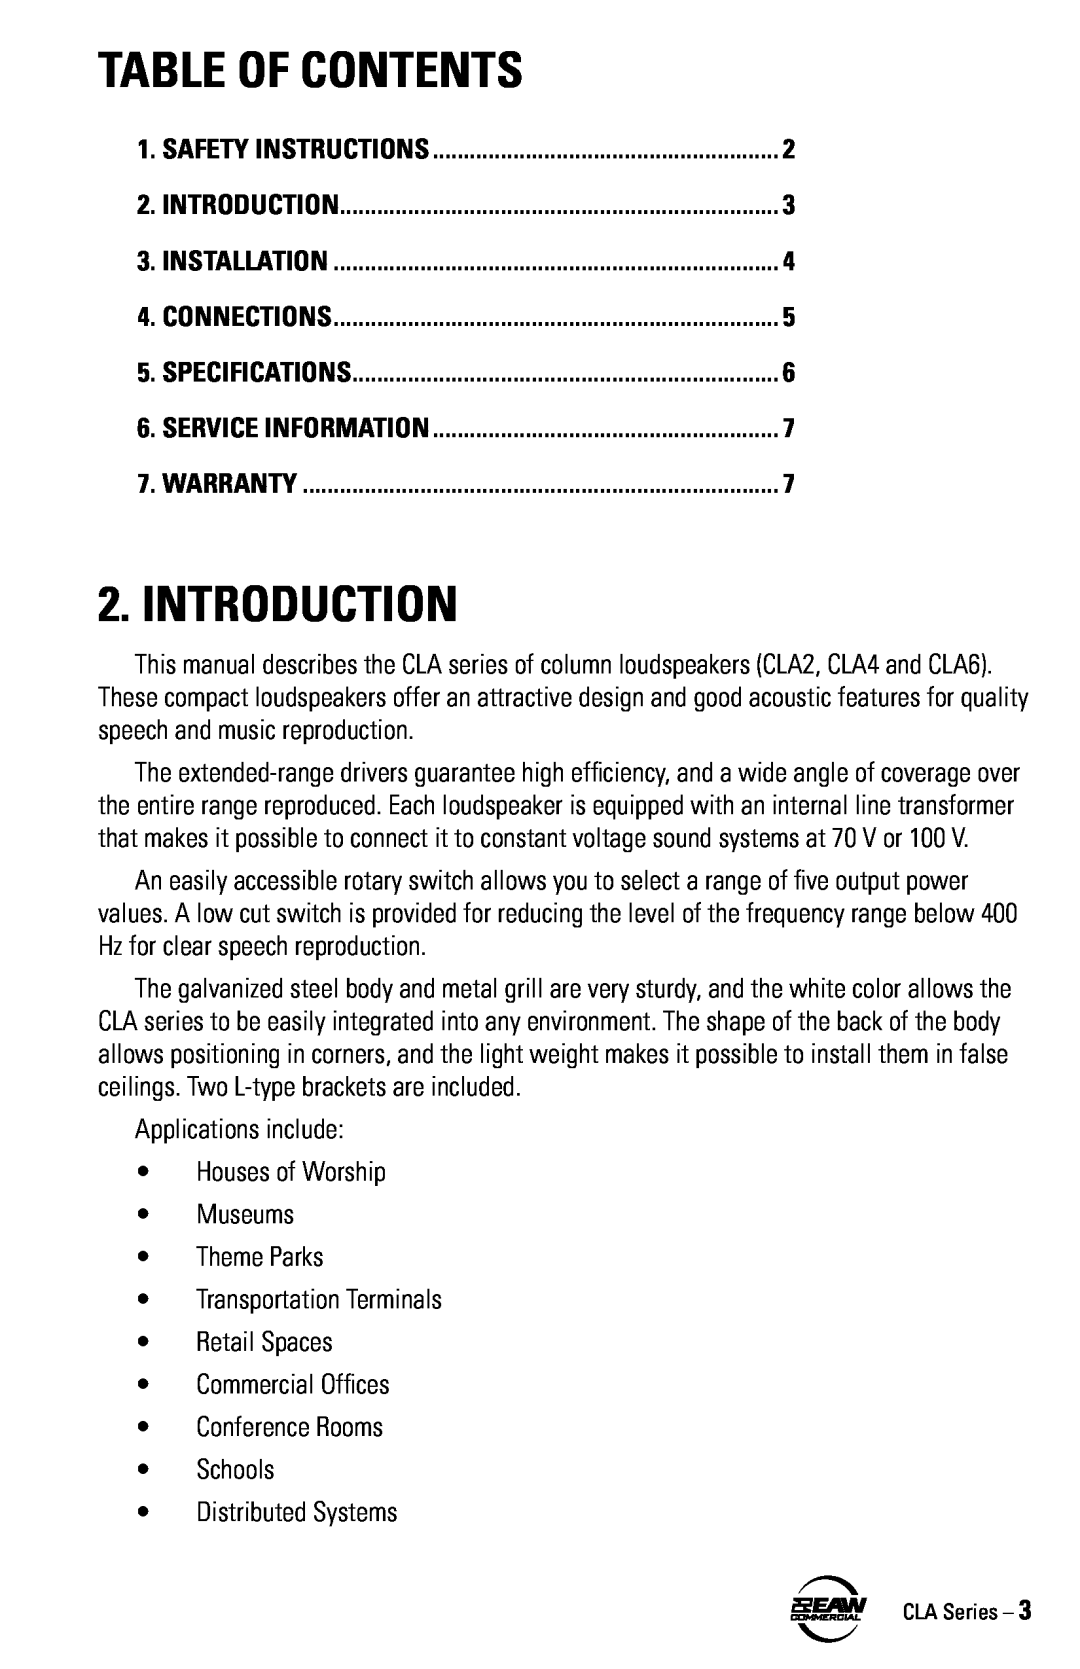 EAW CLA6 CLA4 CLA2 instruction manual Table Of Contents, Introduction 